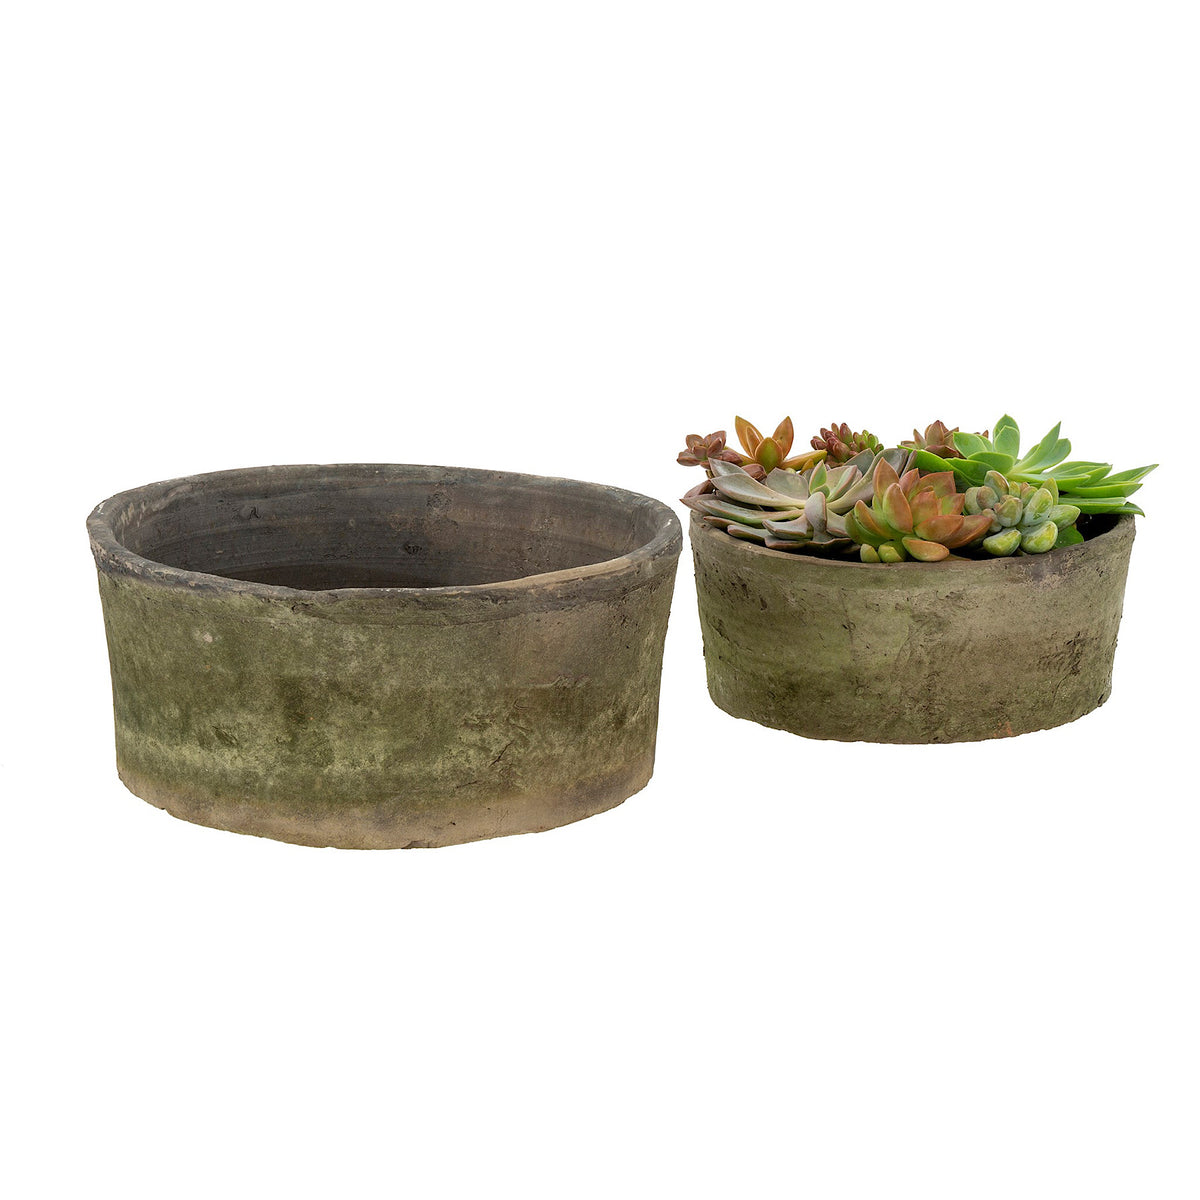 Aged Clay Planters, Antique Blackstone, Two Sizes